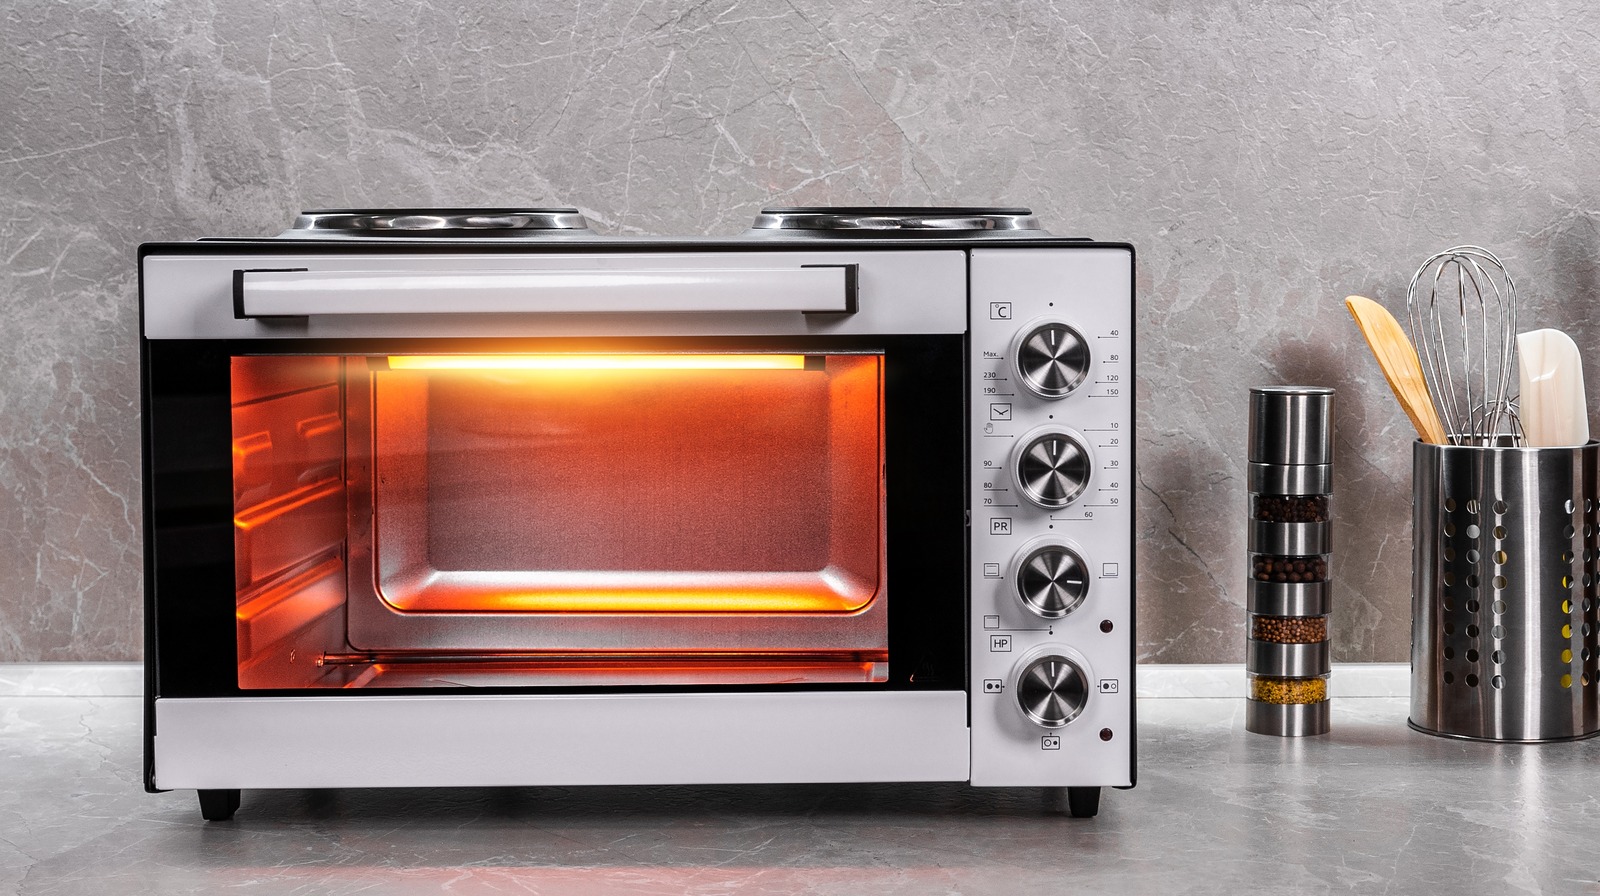 https://www.tastingtable.com/img/gallery/dont-freak-out-if-your-new-toaster-oven-is-smoking/l-intro-1655823268.jpg